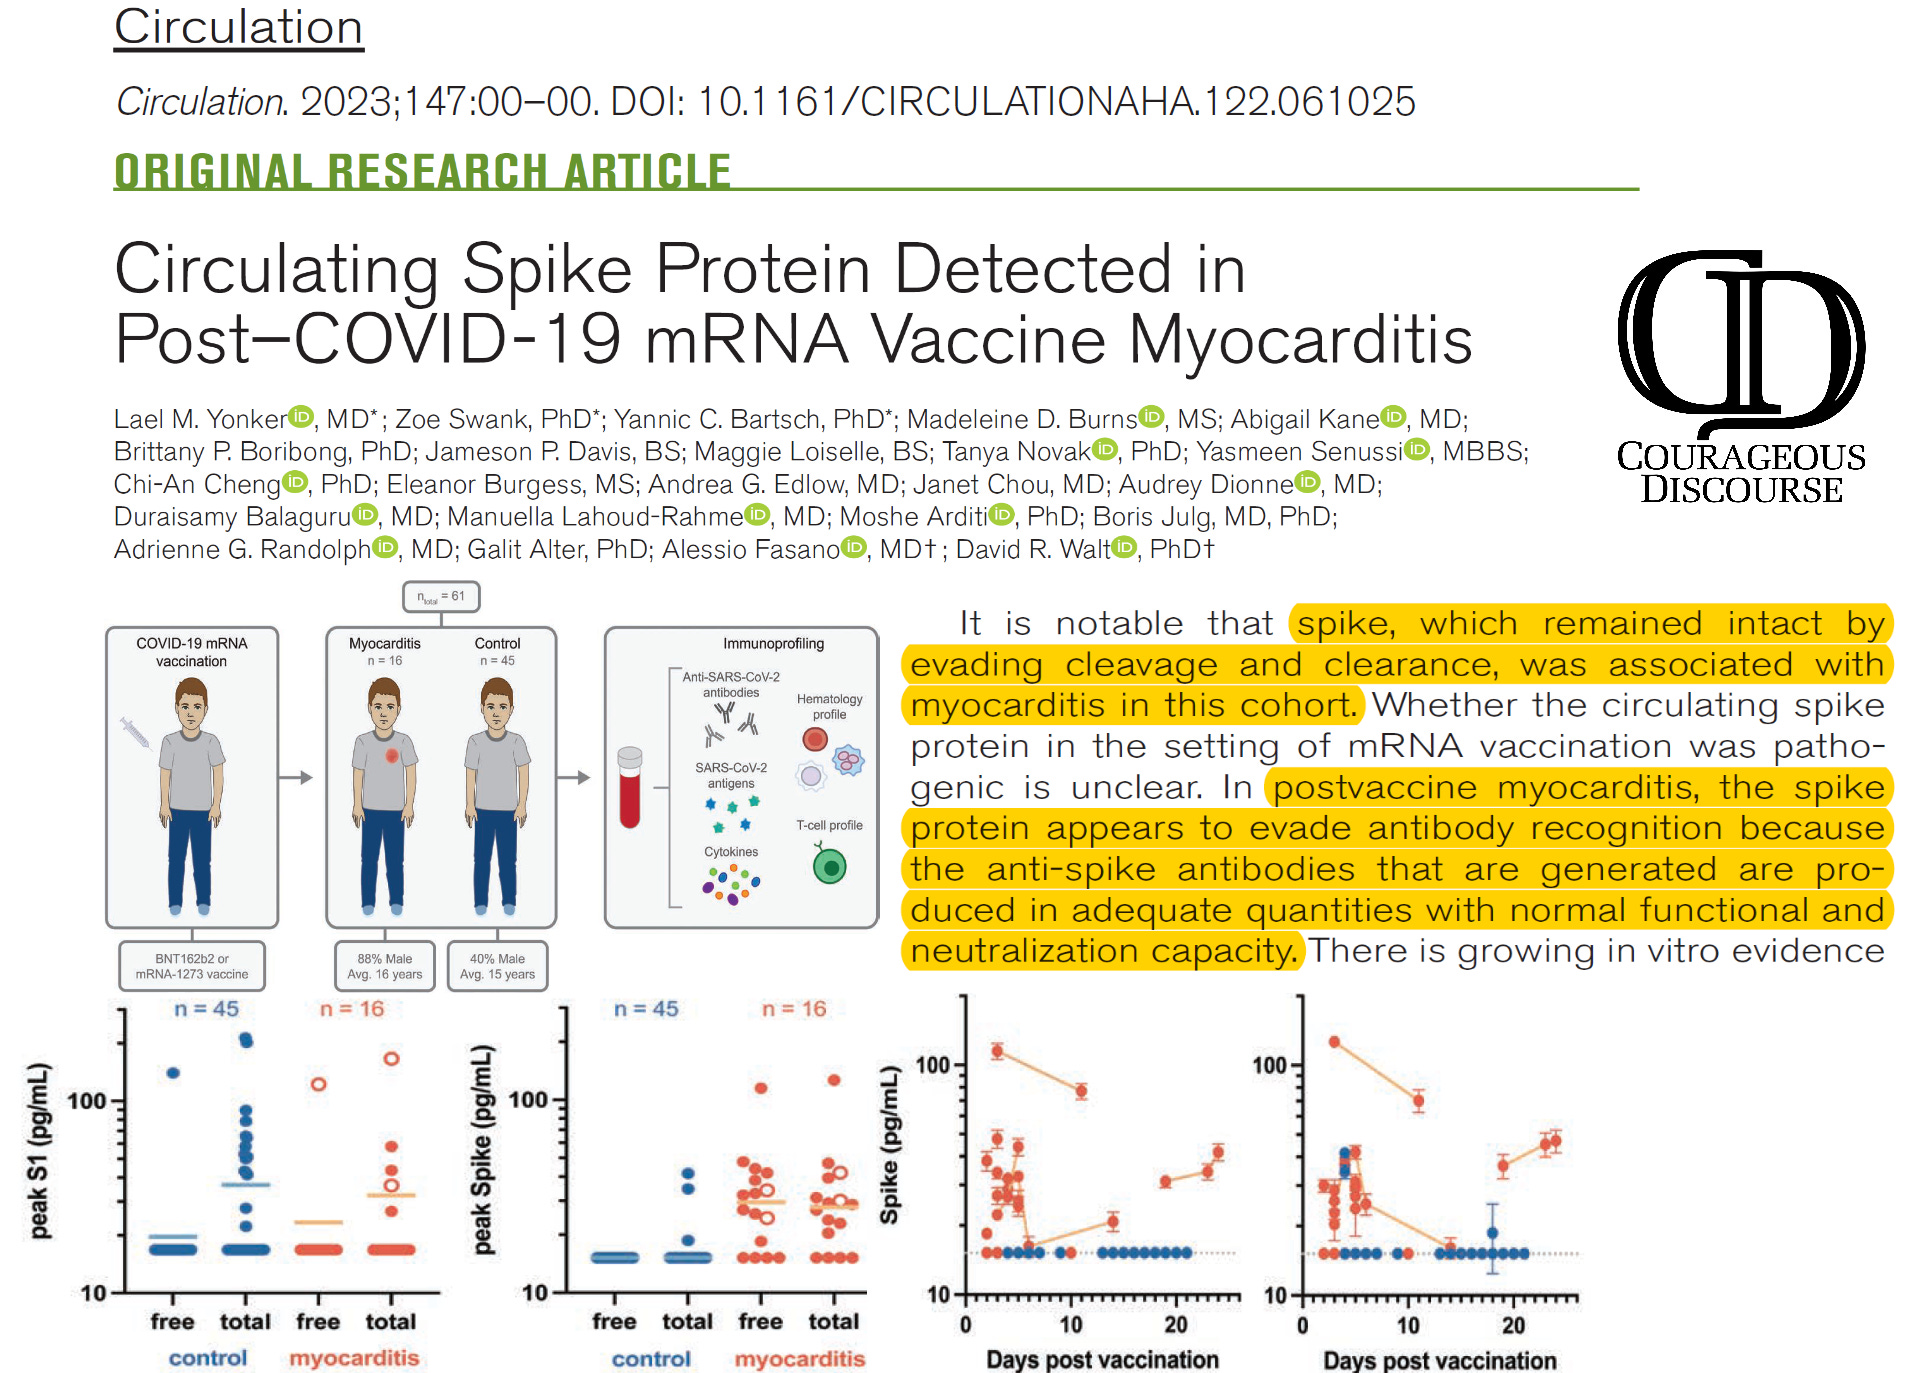 Circulating Spike Protein Detected in Post-COVID-19 mRNA Vaccine Myocarditis